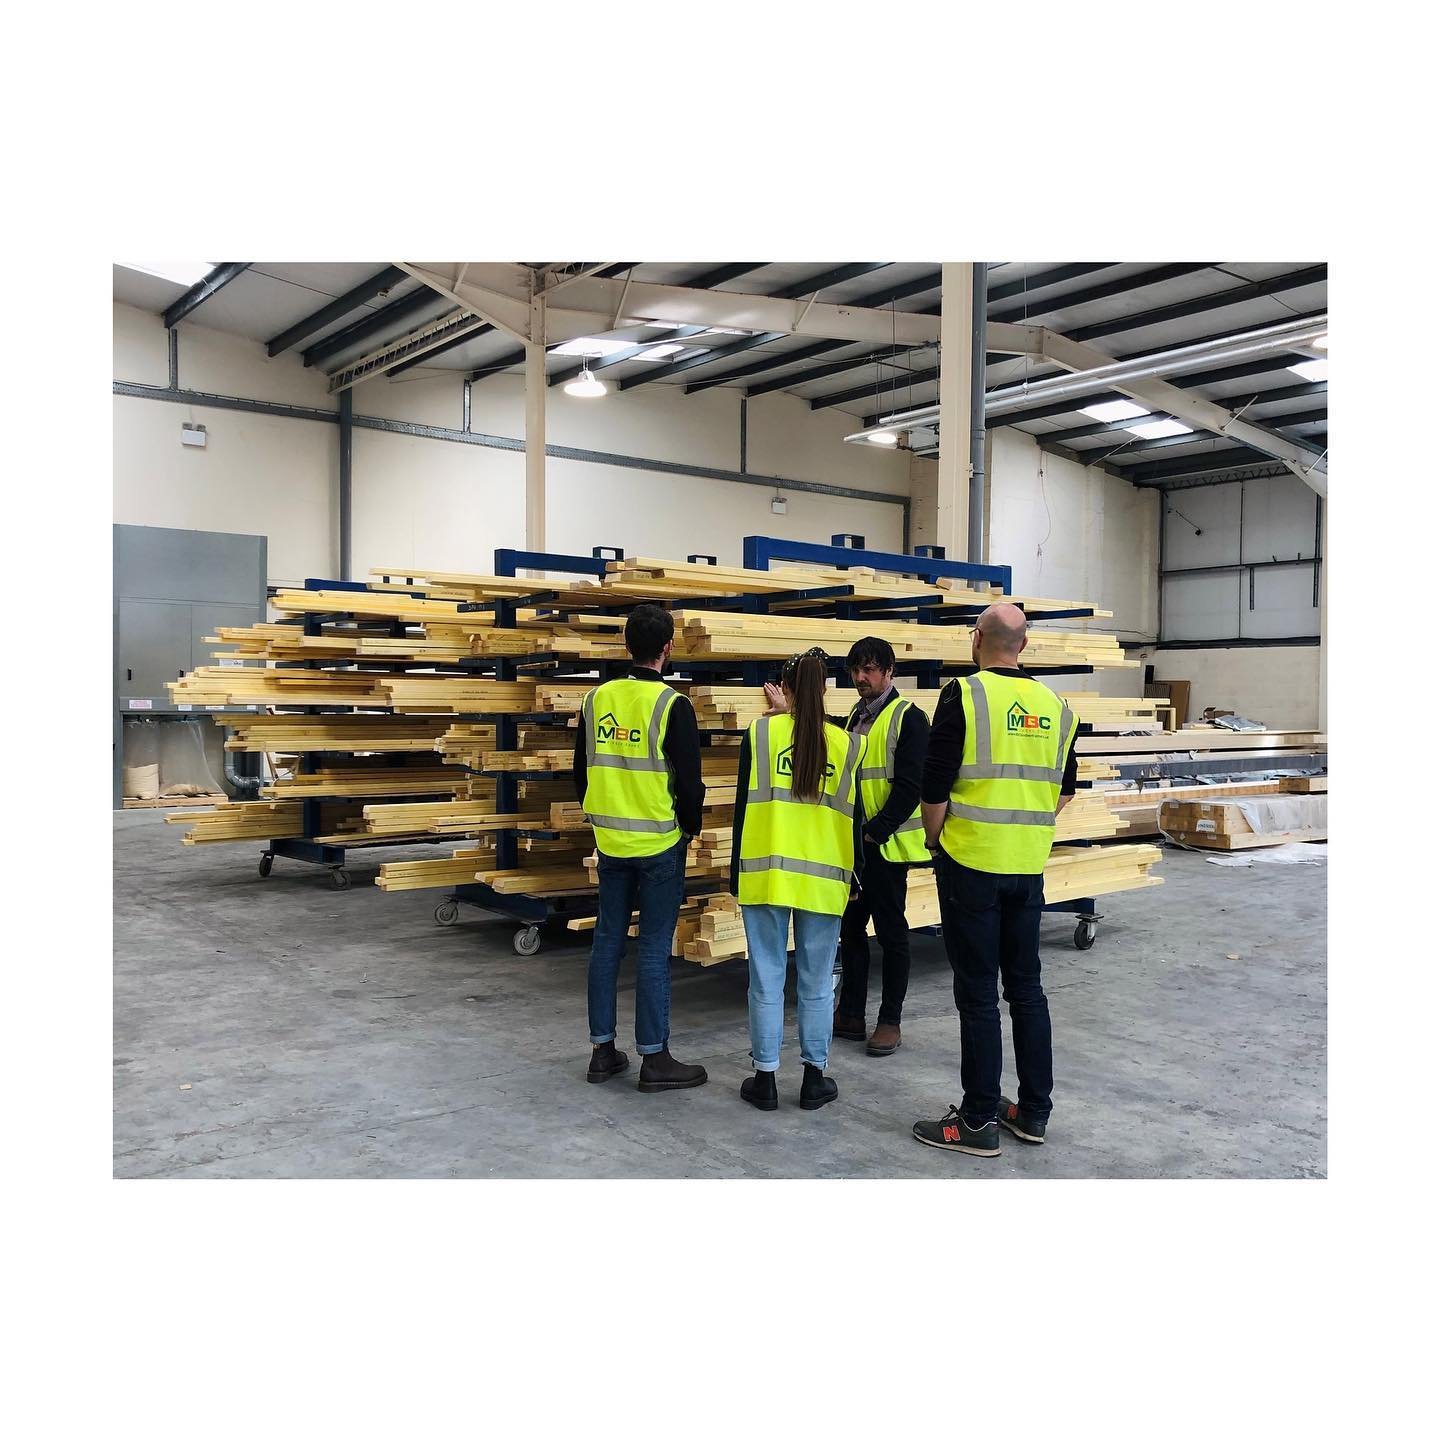 This week we visited MBC Timber Frame factory with our clients who are looking to use timber frame for their bespoke new build home. The project is aiming to be a certified Passivhaus, built to the highest standards of insulation and air tightness. I